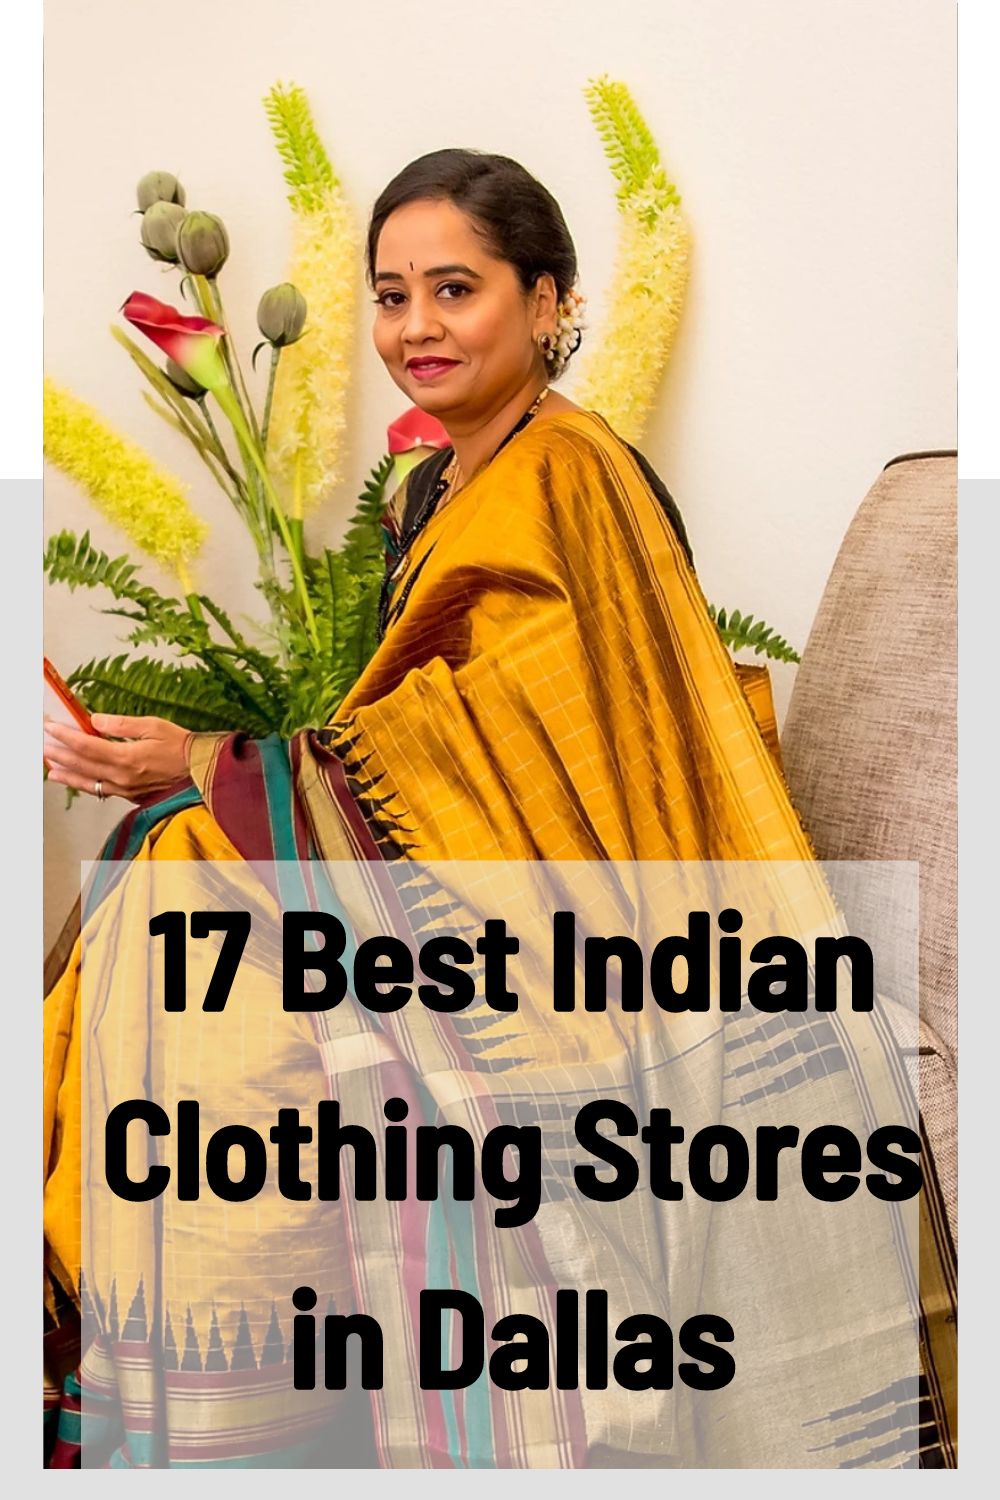 17 Best Indian Clothing Stores in Dallas